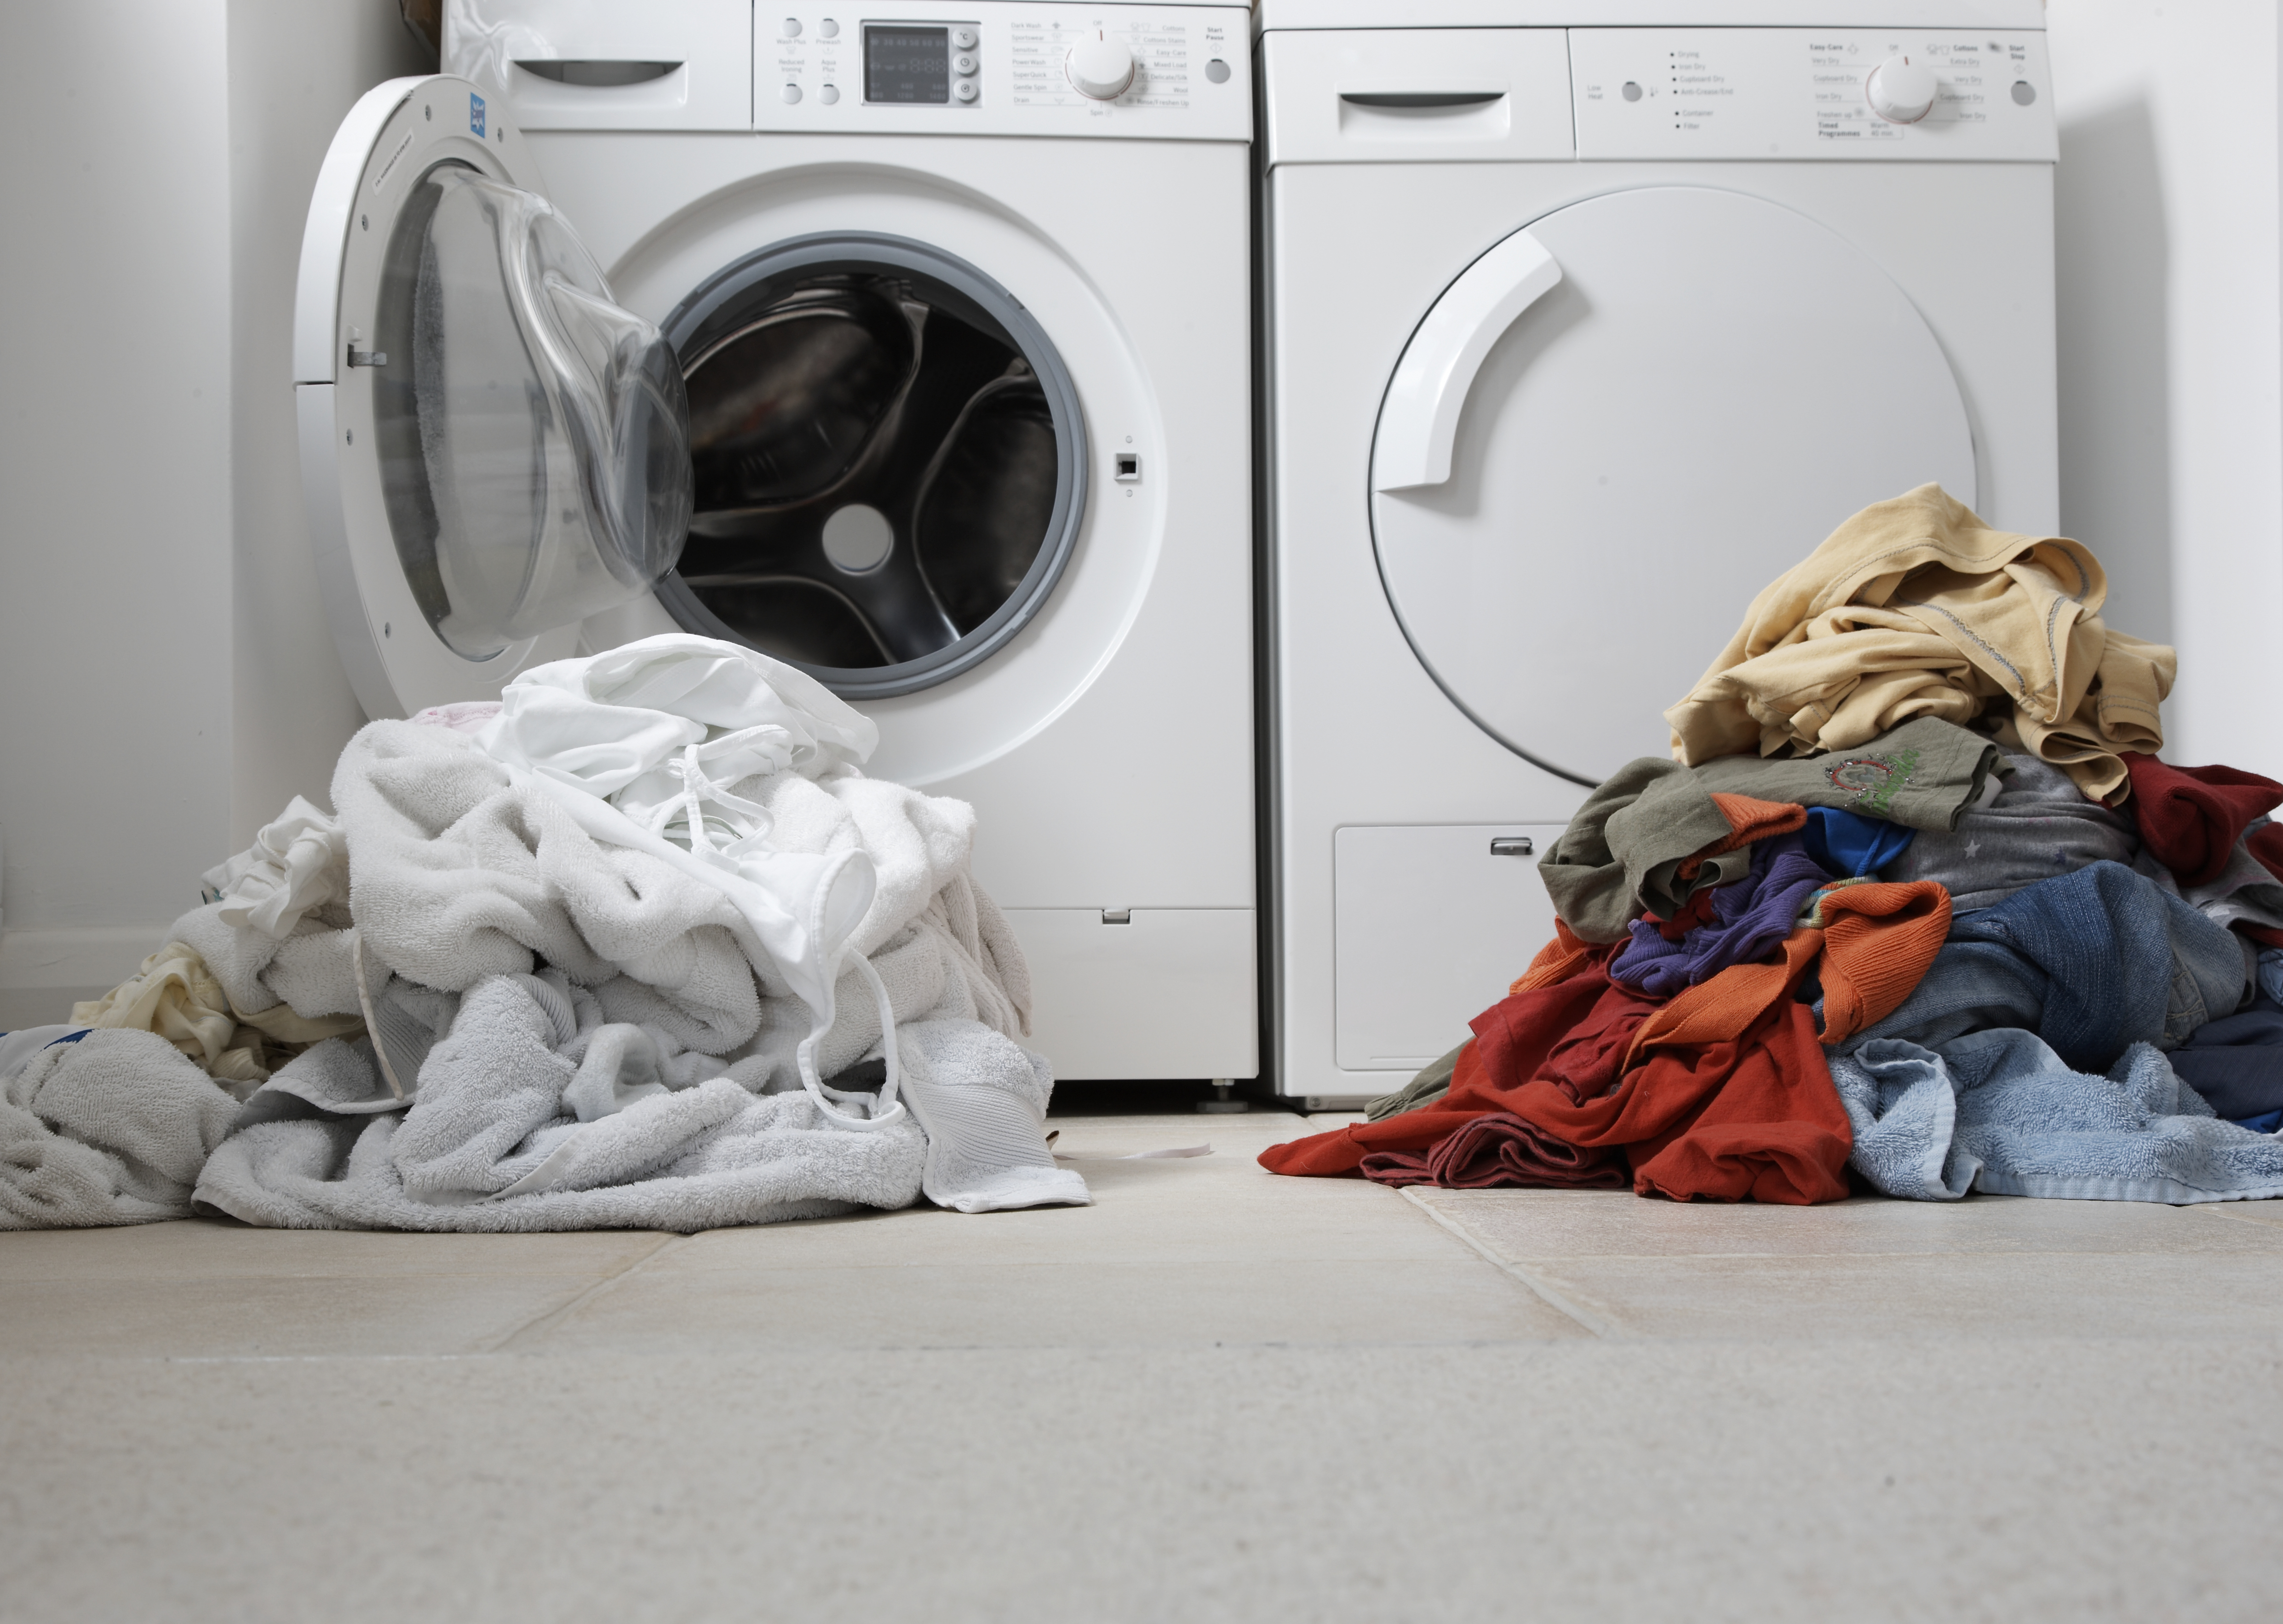 https://www.thecleaningauthority.com/images/articles/Laundry_Blog-Photo.jpg